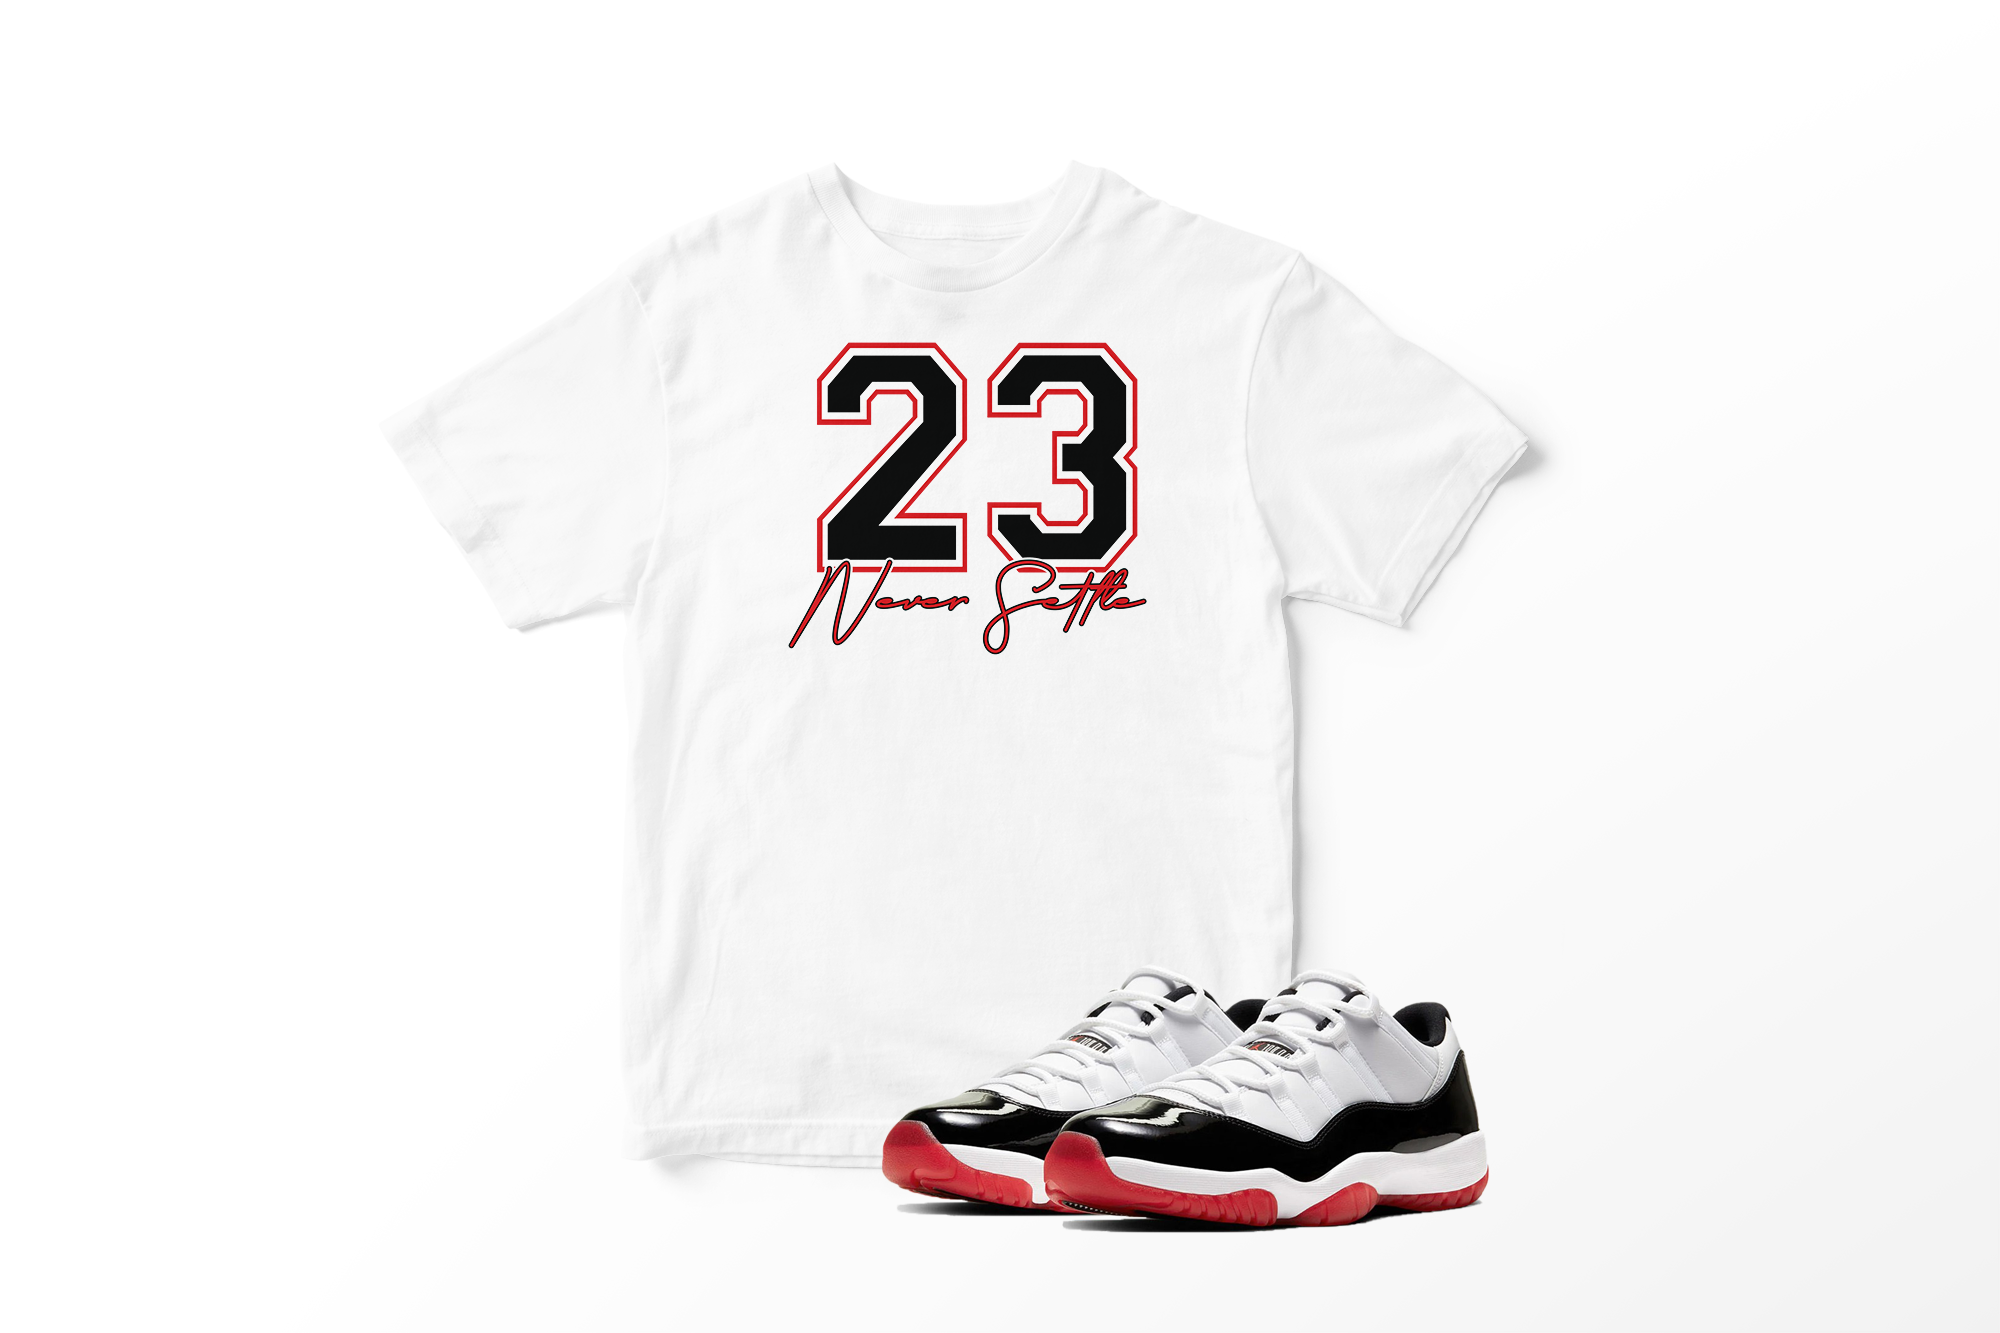 'Never Settle' in Concord Bred CW Short Sleeve Tee